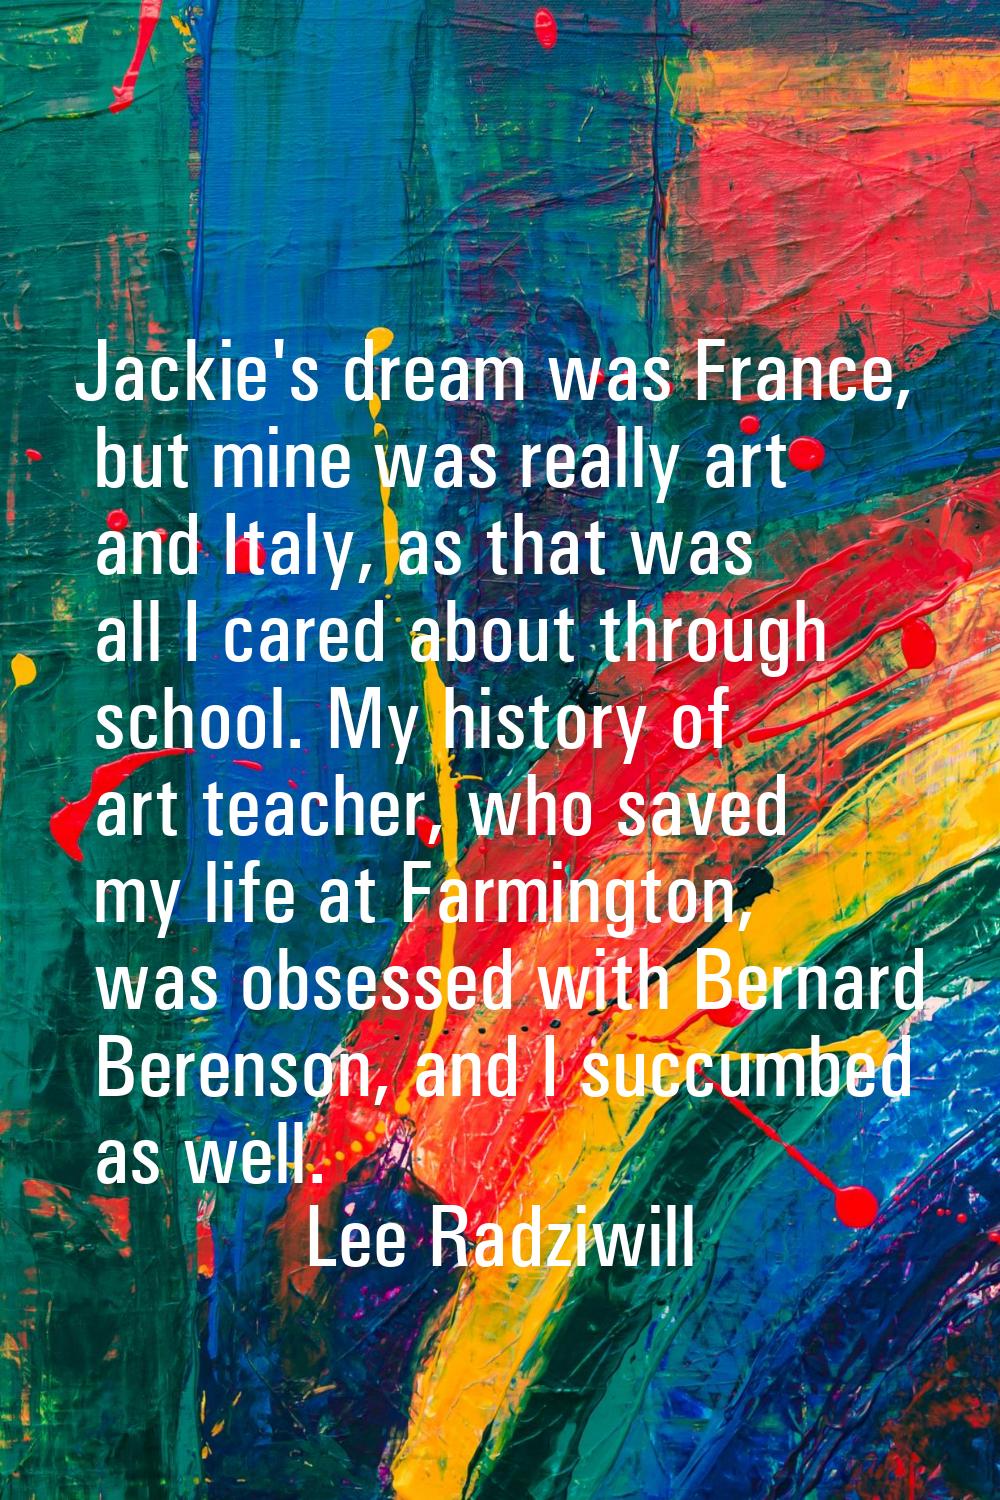 Jackie's dream was France, but mine was really art and Italy, as that was all I cared about through